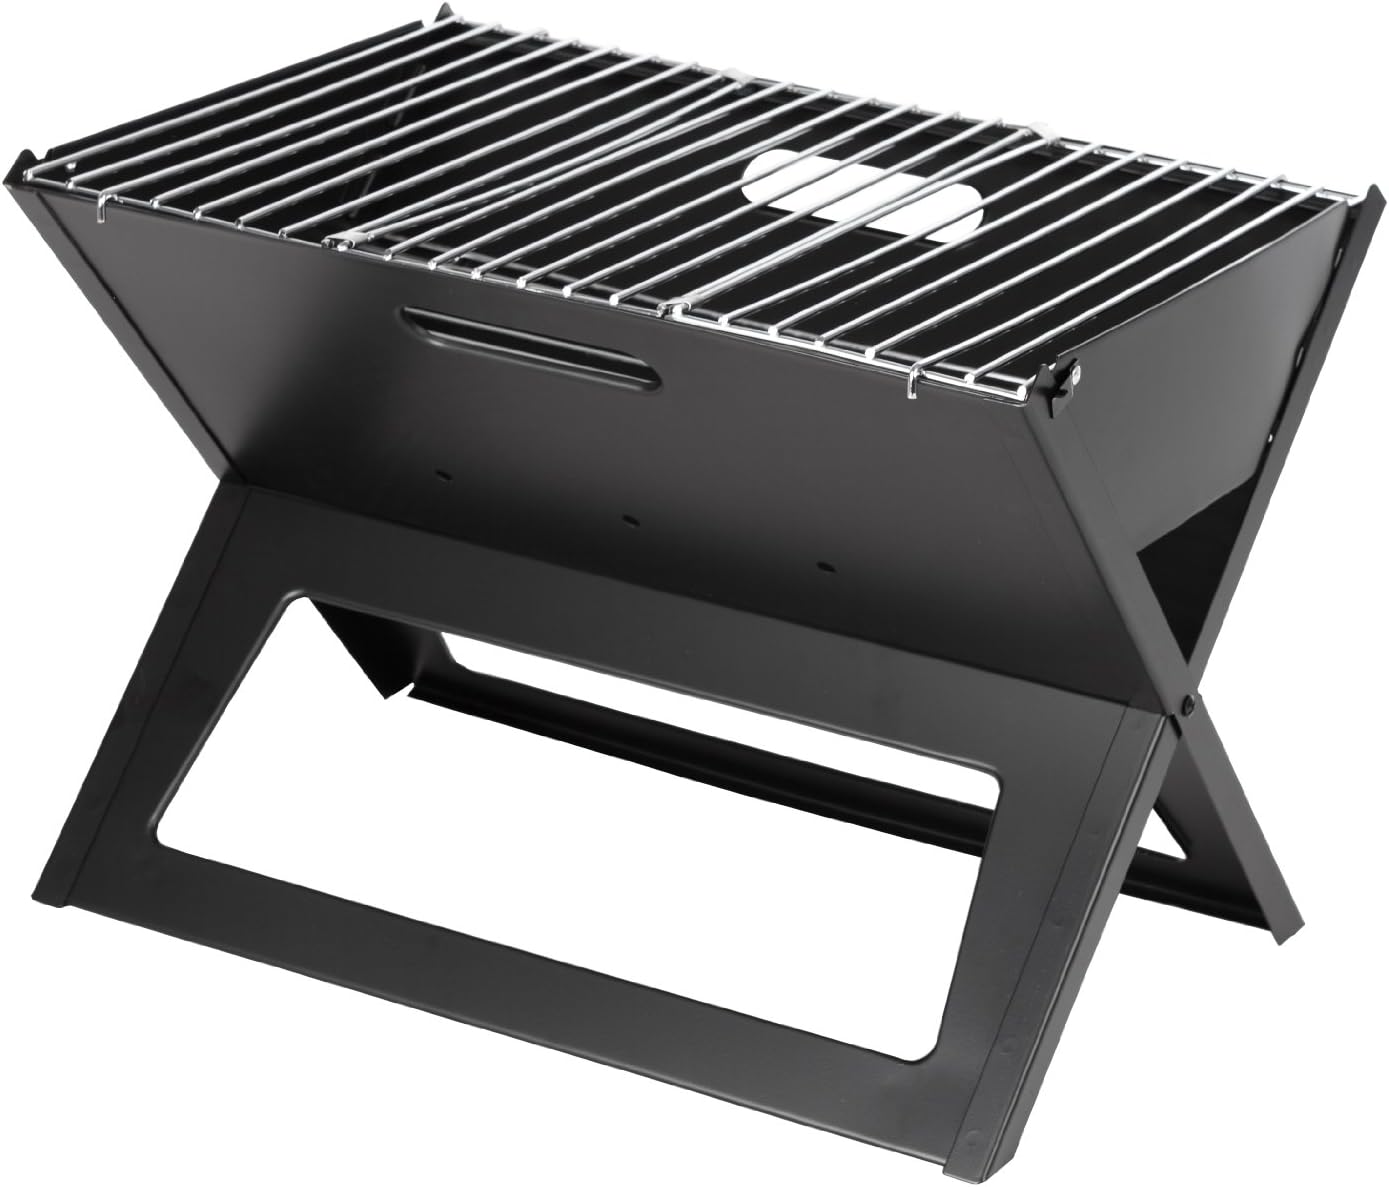 Camping Campfire Grill, Portable Folding Charcoal Grills, Backpacking